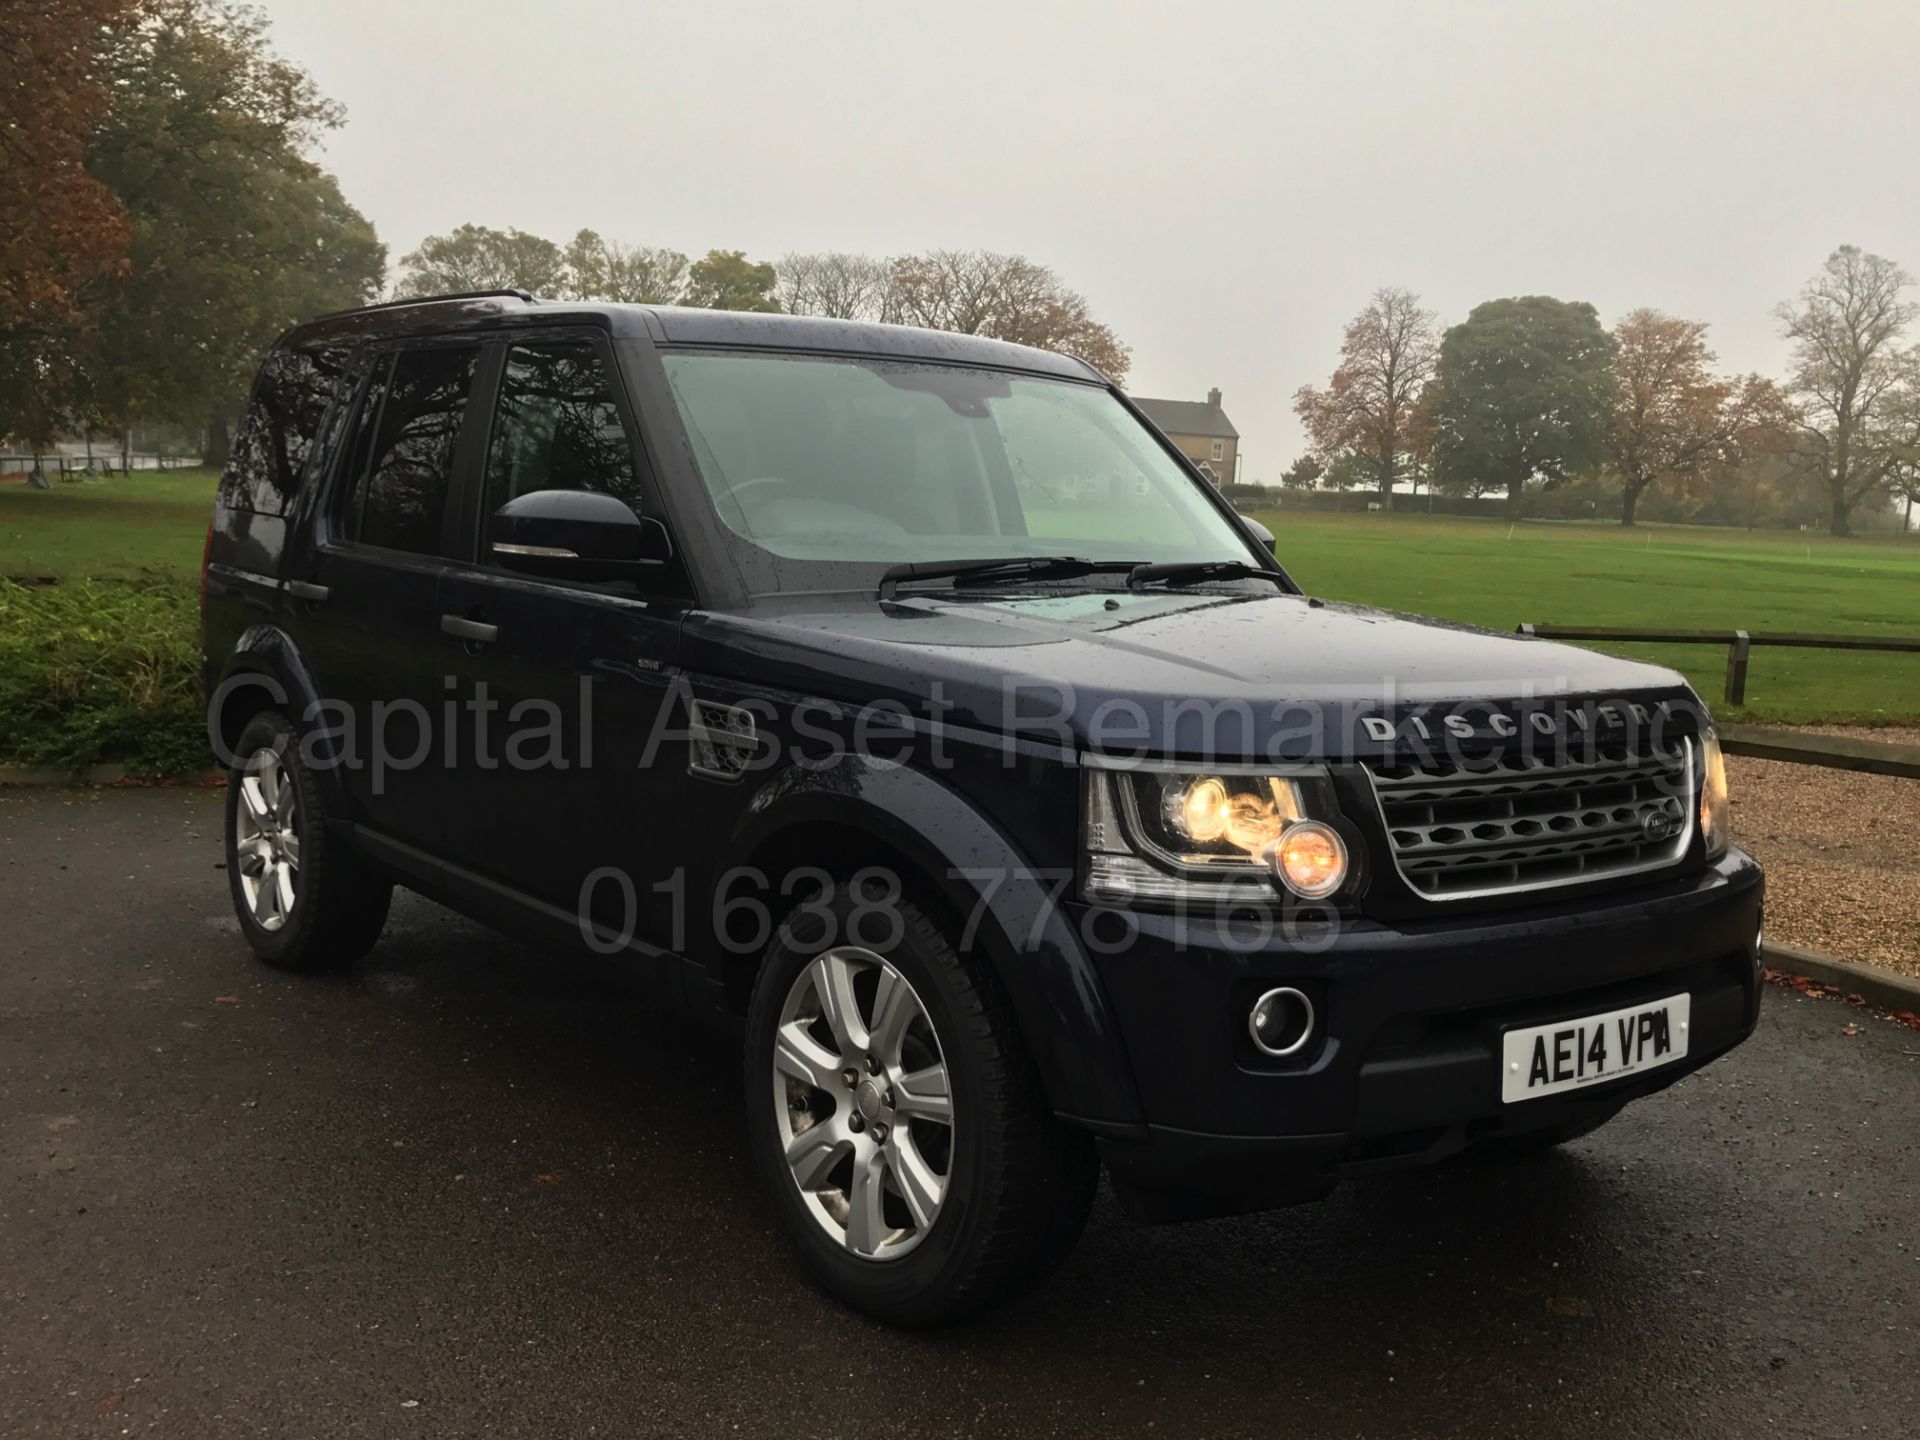 ON SALE LAND ROVER DISCOVERY 4 (2014) '3.0 SDV6 - 8 SPEED AUTO - LEATHER - SAT NAV -7 SEATER'1 OWNER - Image 2 of 41